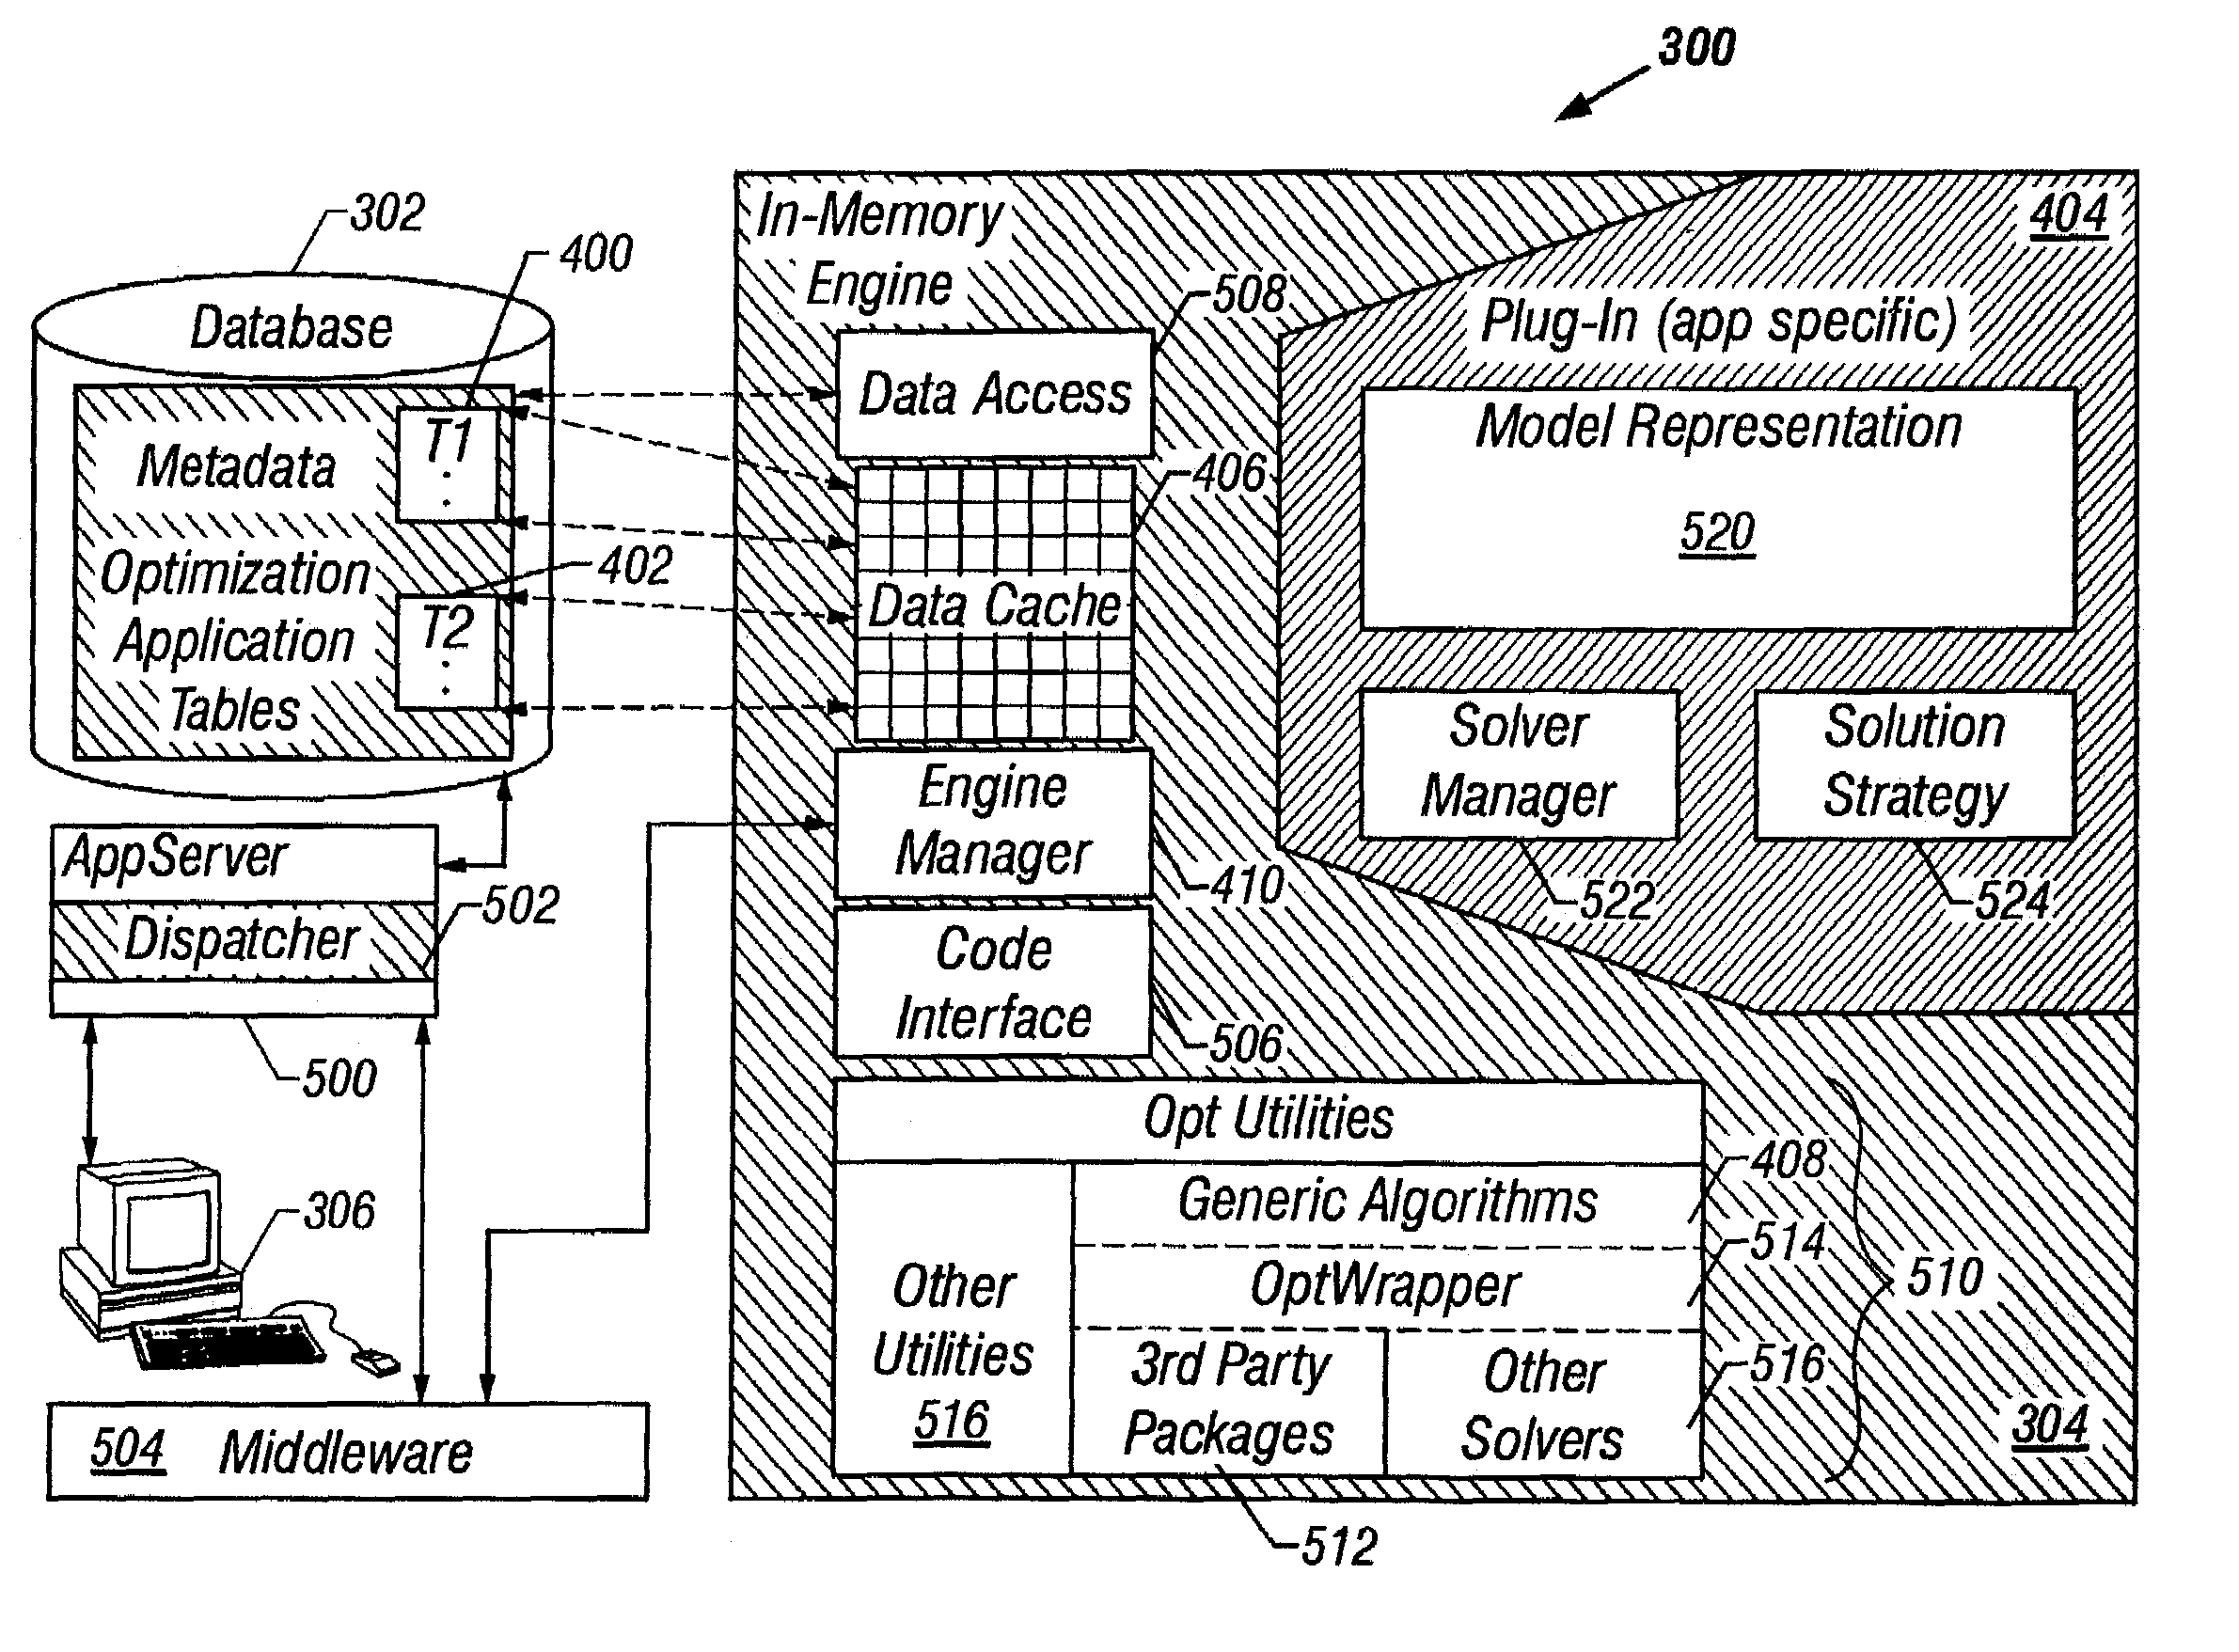 System and method for efficiently performing memory intensive computations including a bidirectional synchronization mechanism for maintaining consistency of data